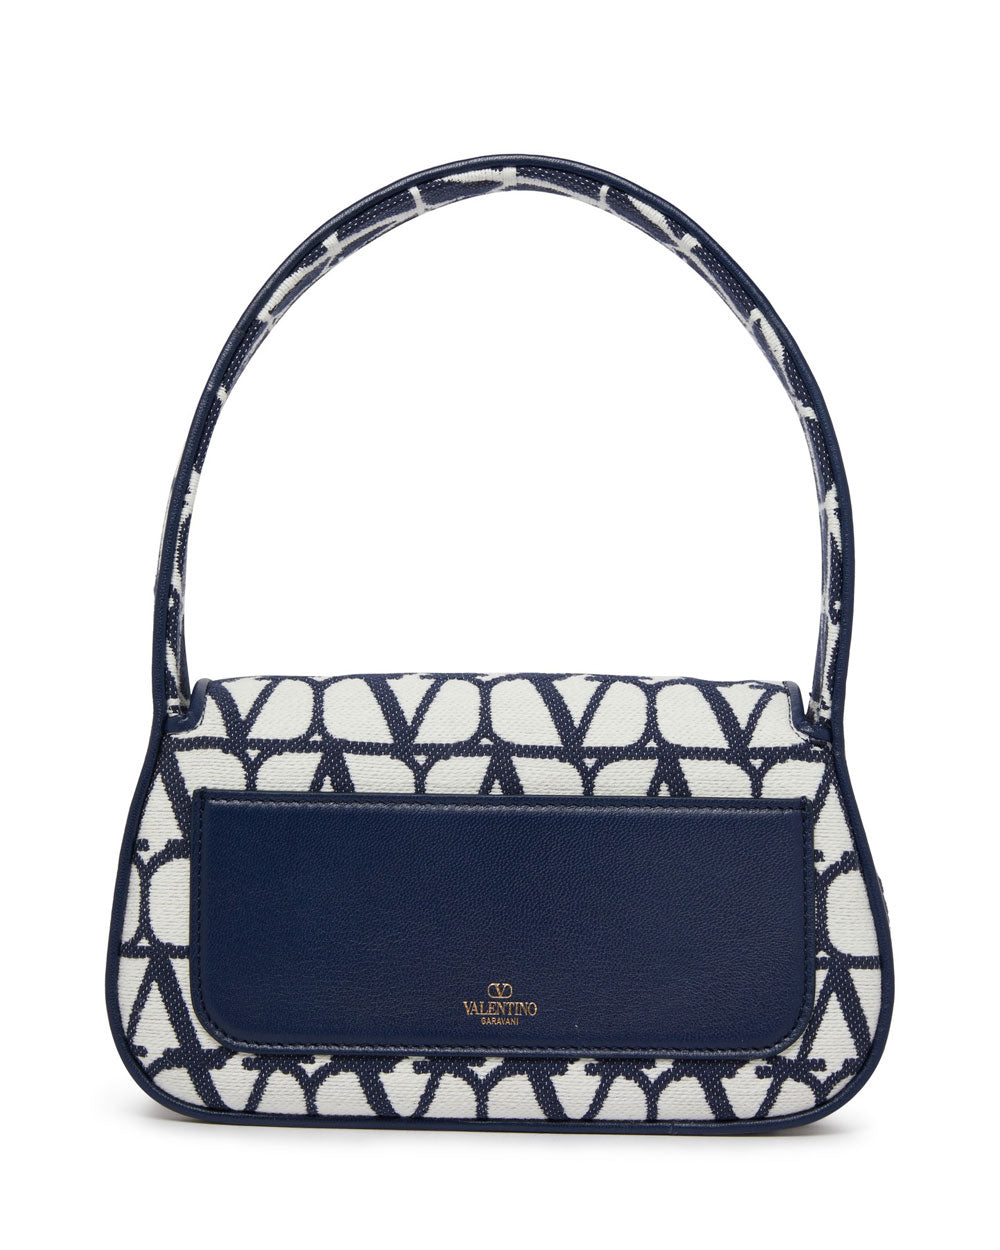 Loco Toile Iconographe Small Hobo Bag in Blue and White